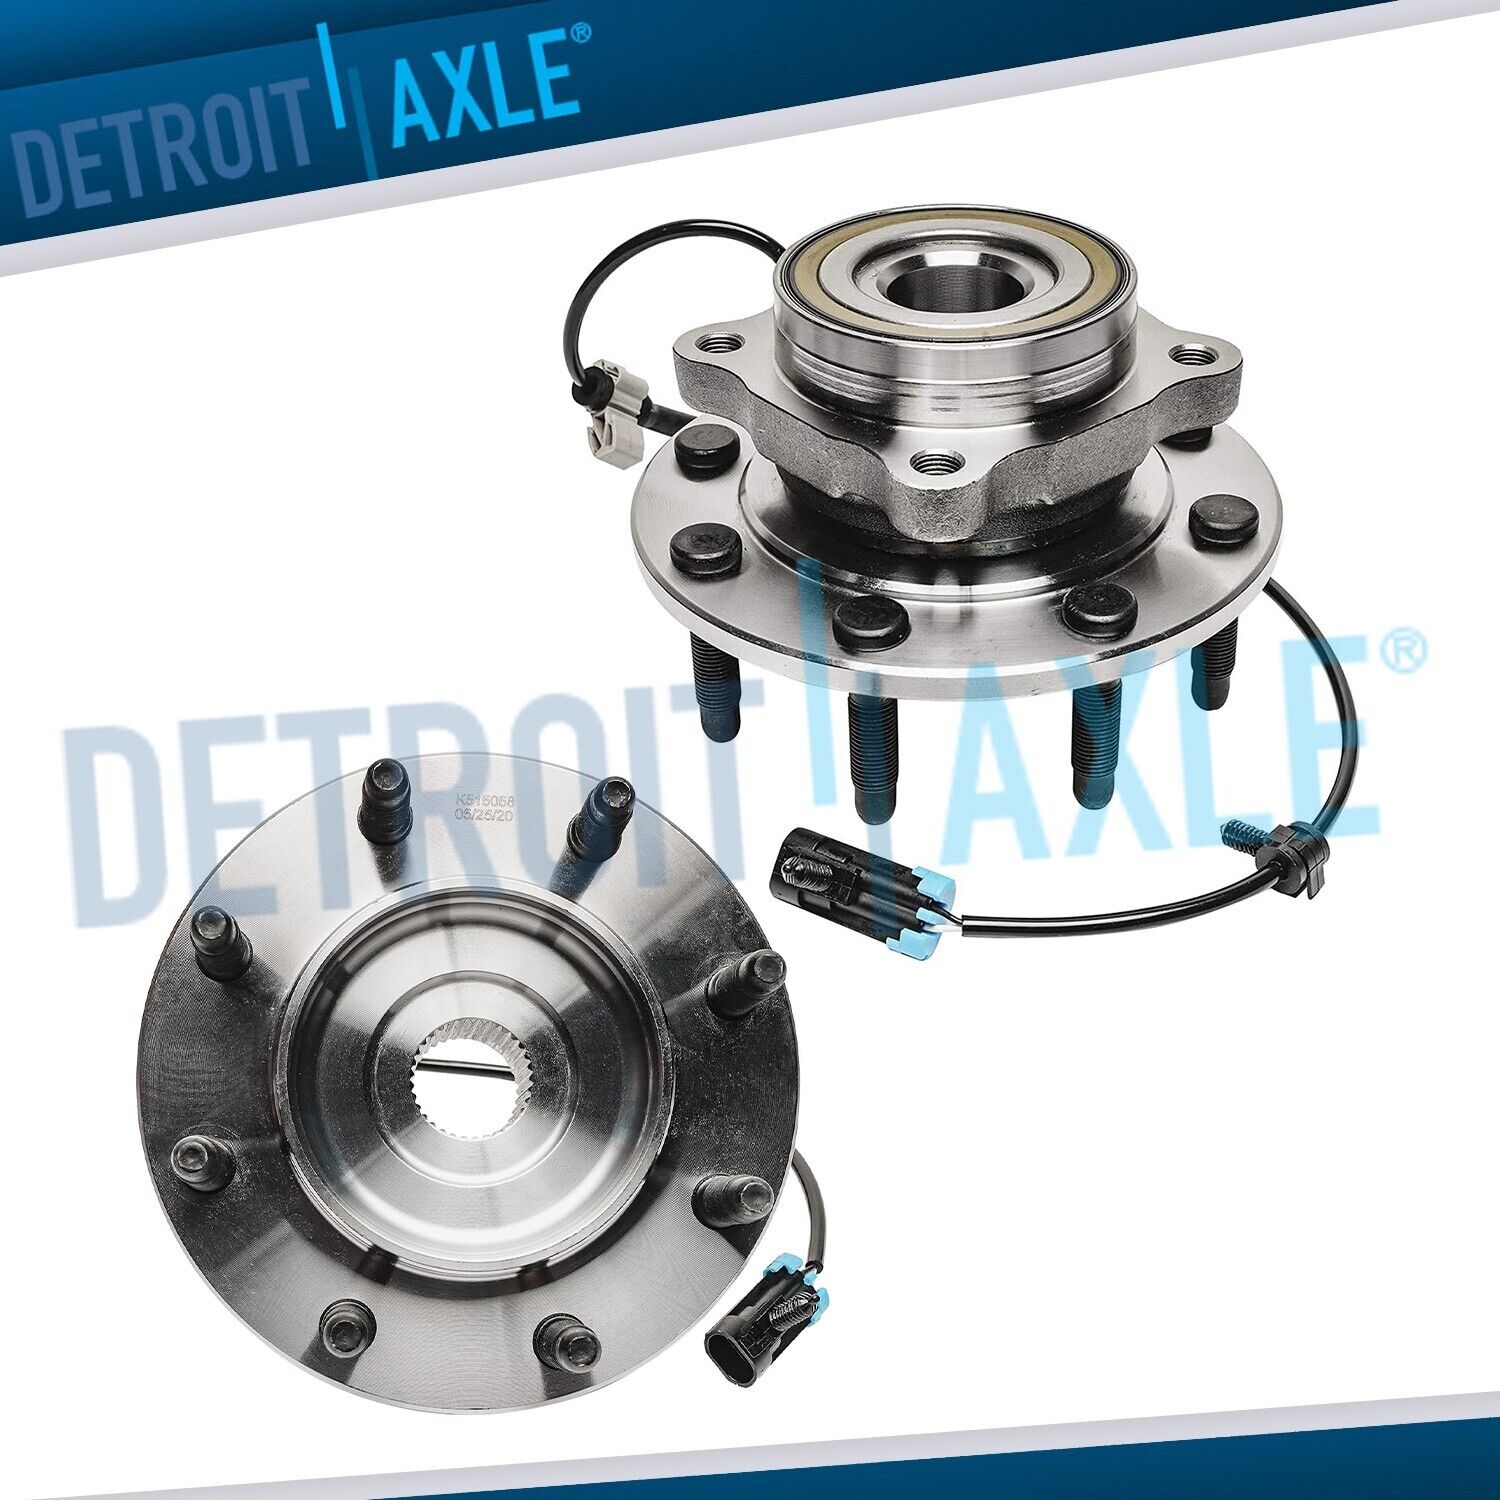 4WD Front Wheel Bearing and Hubs for Chevy Silverado Sierra 3500 Avalanche 2500